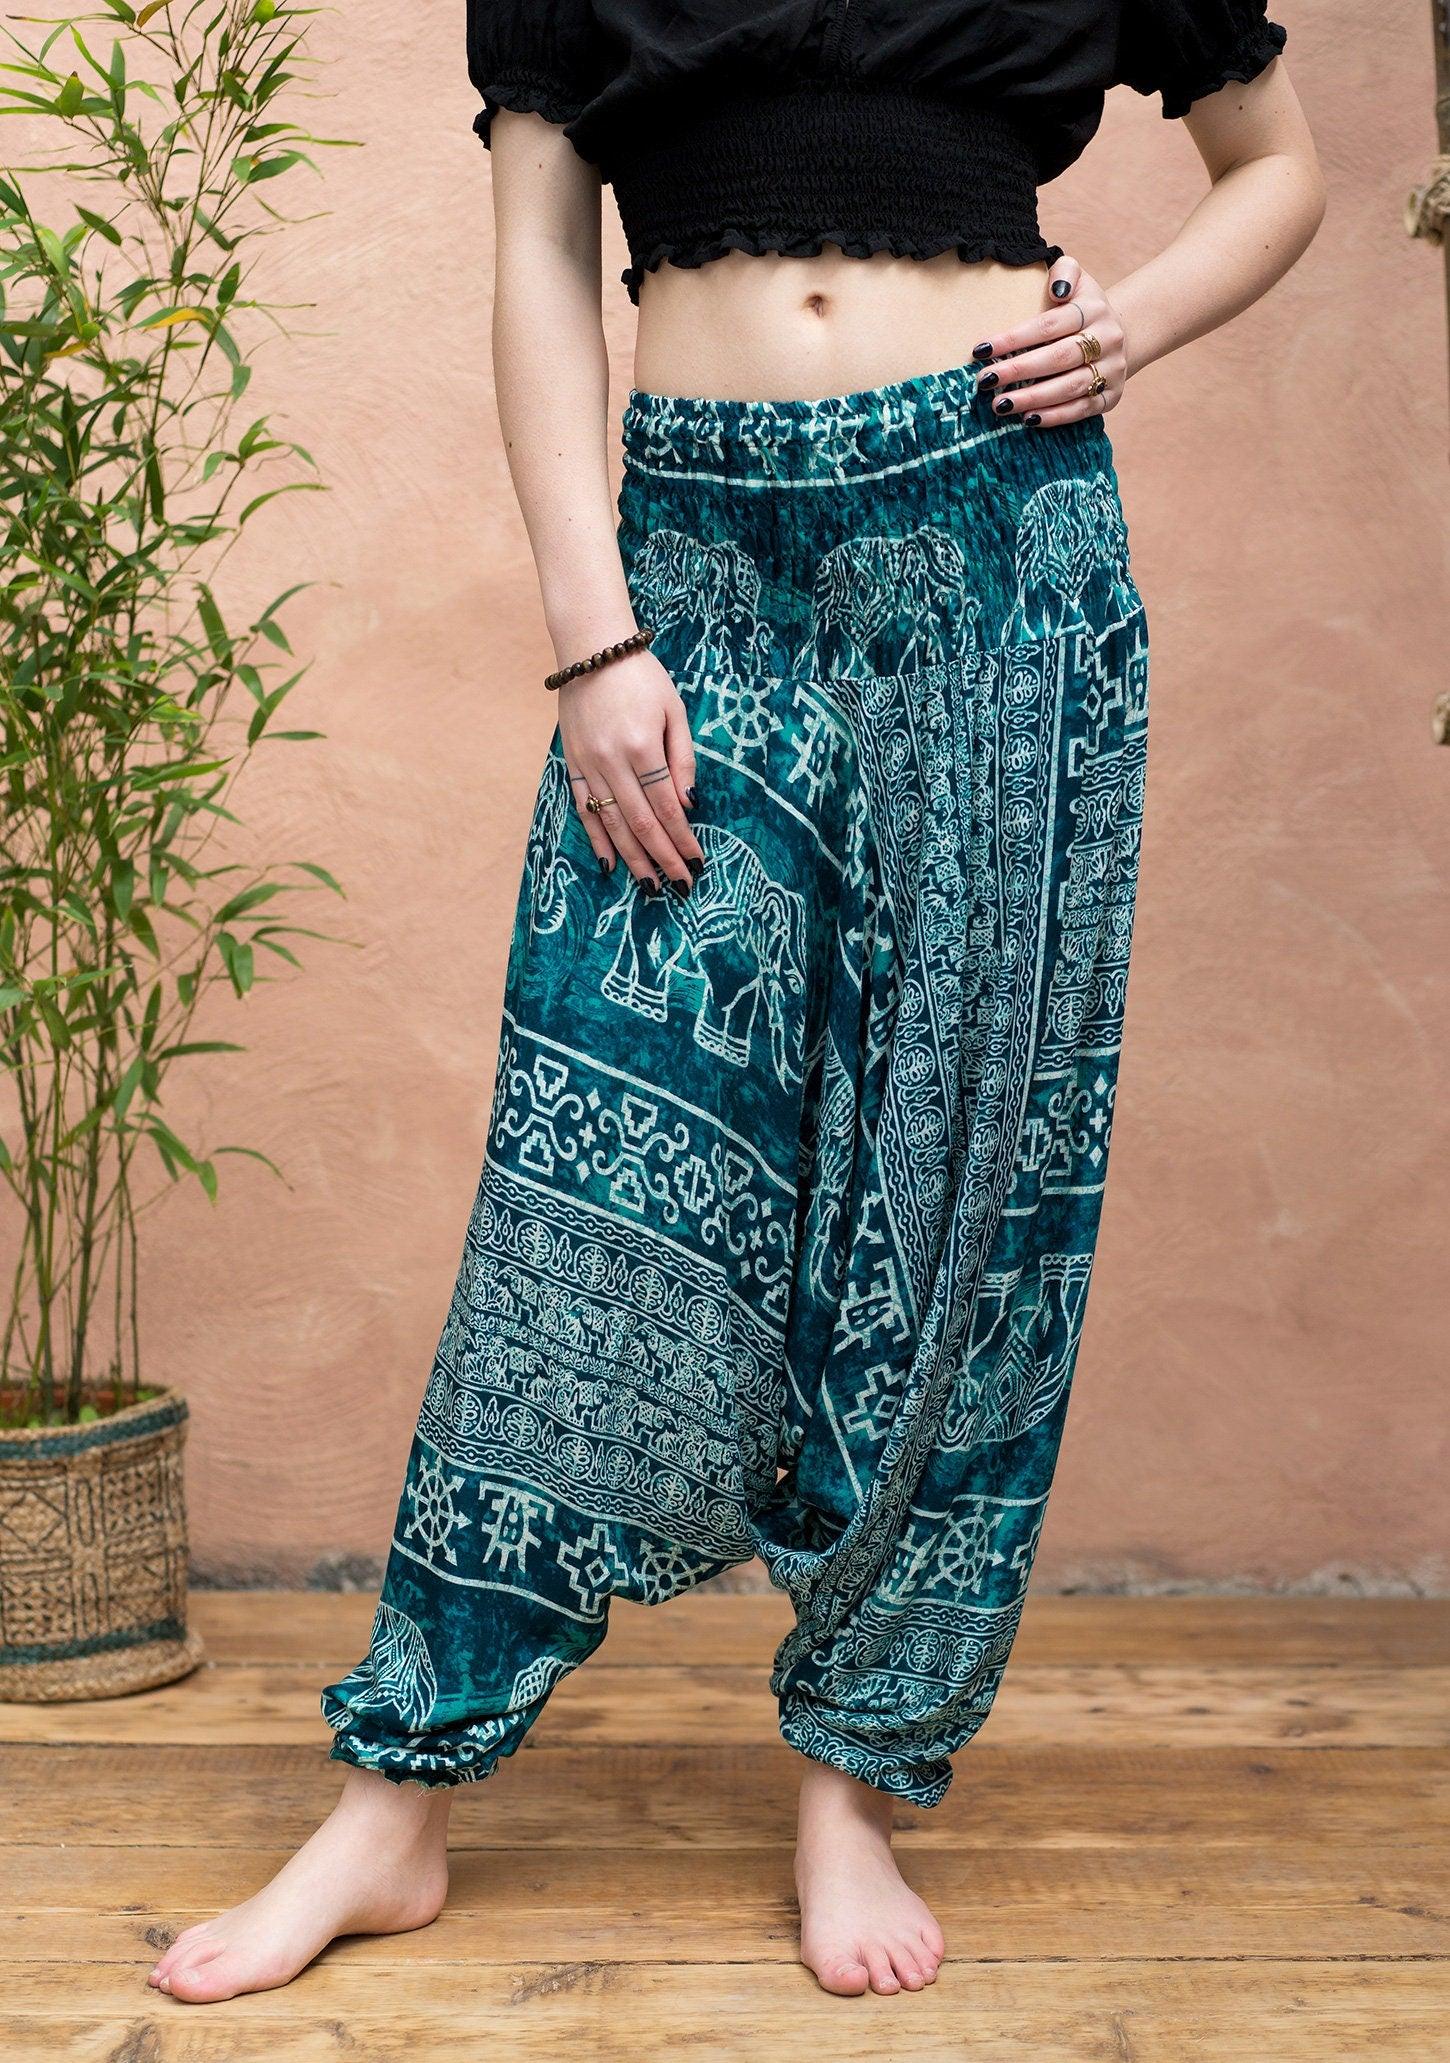 Why Do All the Backpackers in Southeast Asia Wear Elephant Pants? –  Courtney Lambert